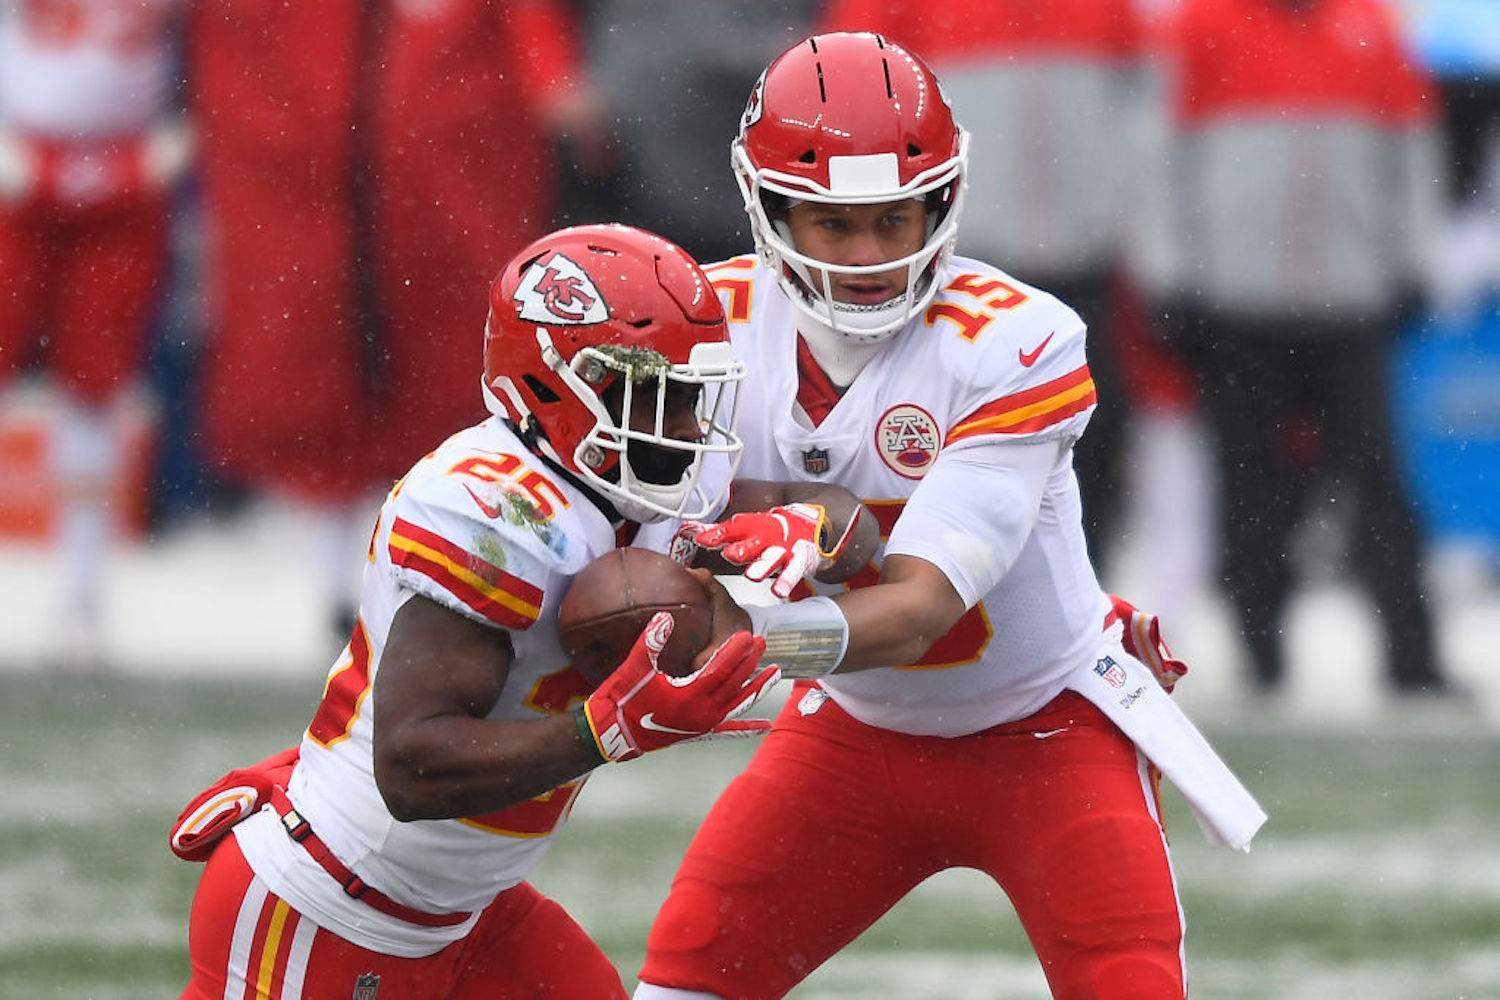 Clyde Edwards-Helaire has been the most explosive running back for the Chiefs all season, but he's now unlikely to suit up Sunday.